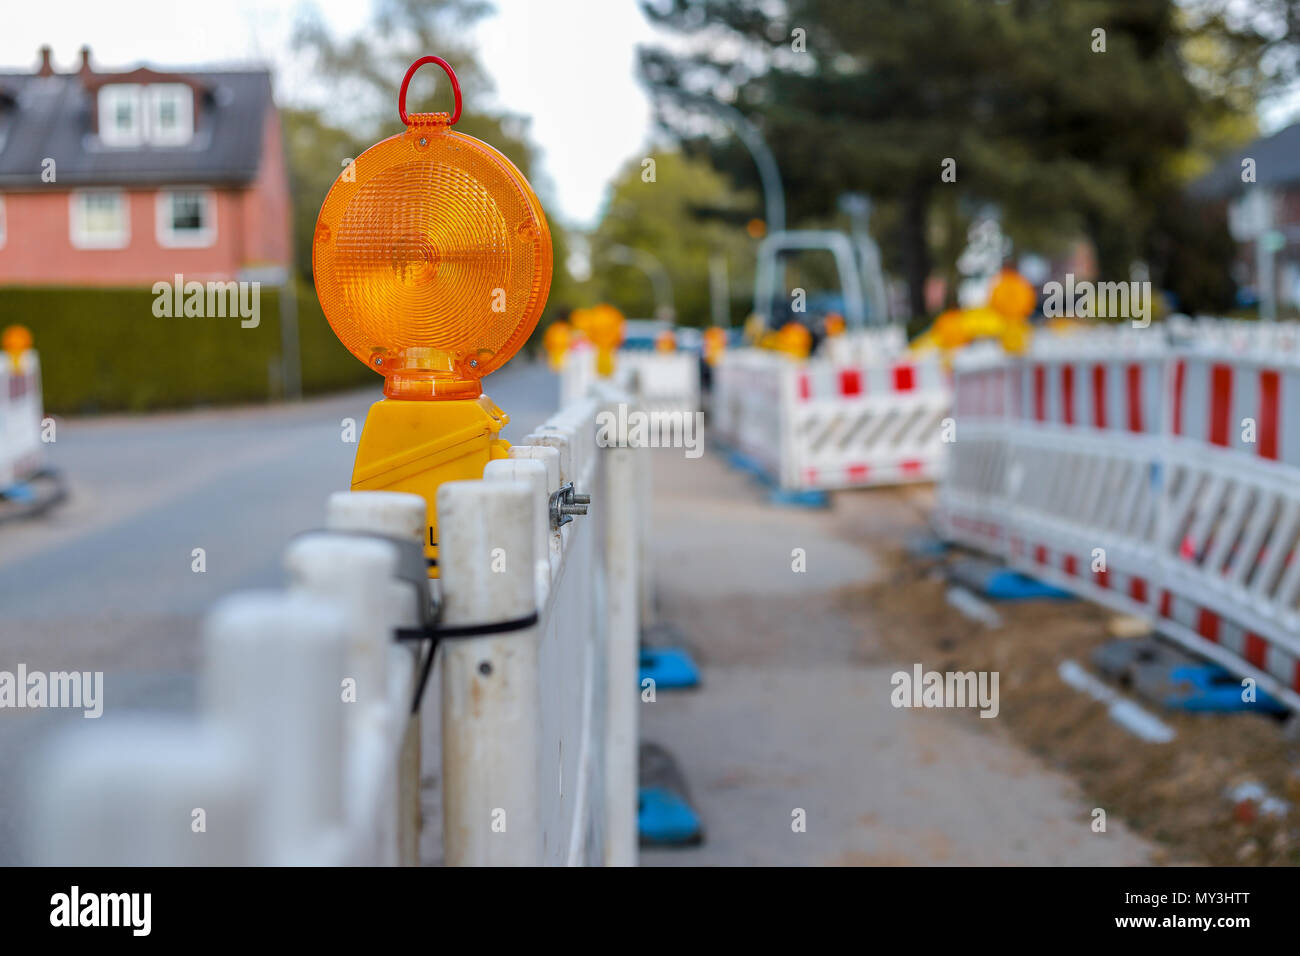 red and white barricades with warning lights at a street in the residential zone, depth of field Stock Photo